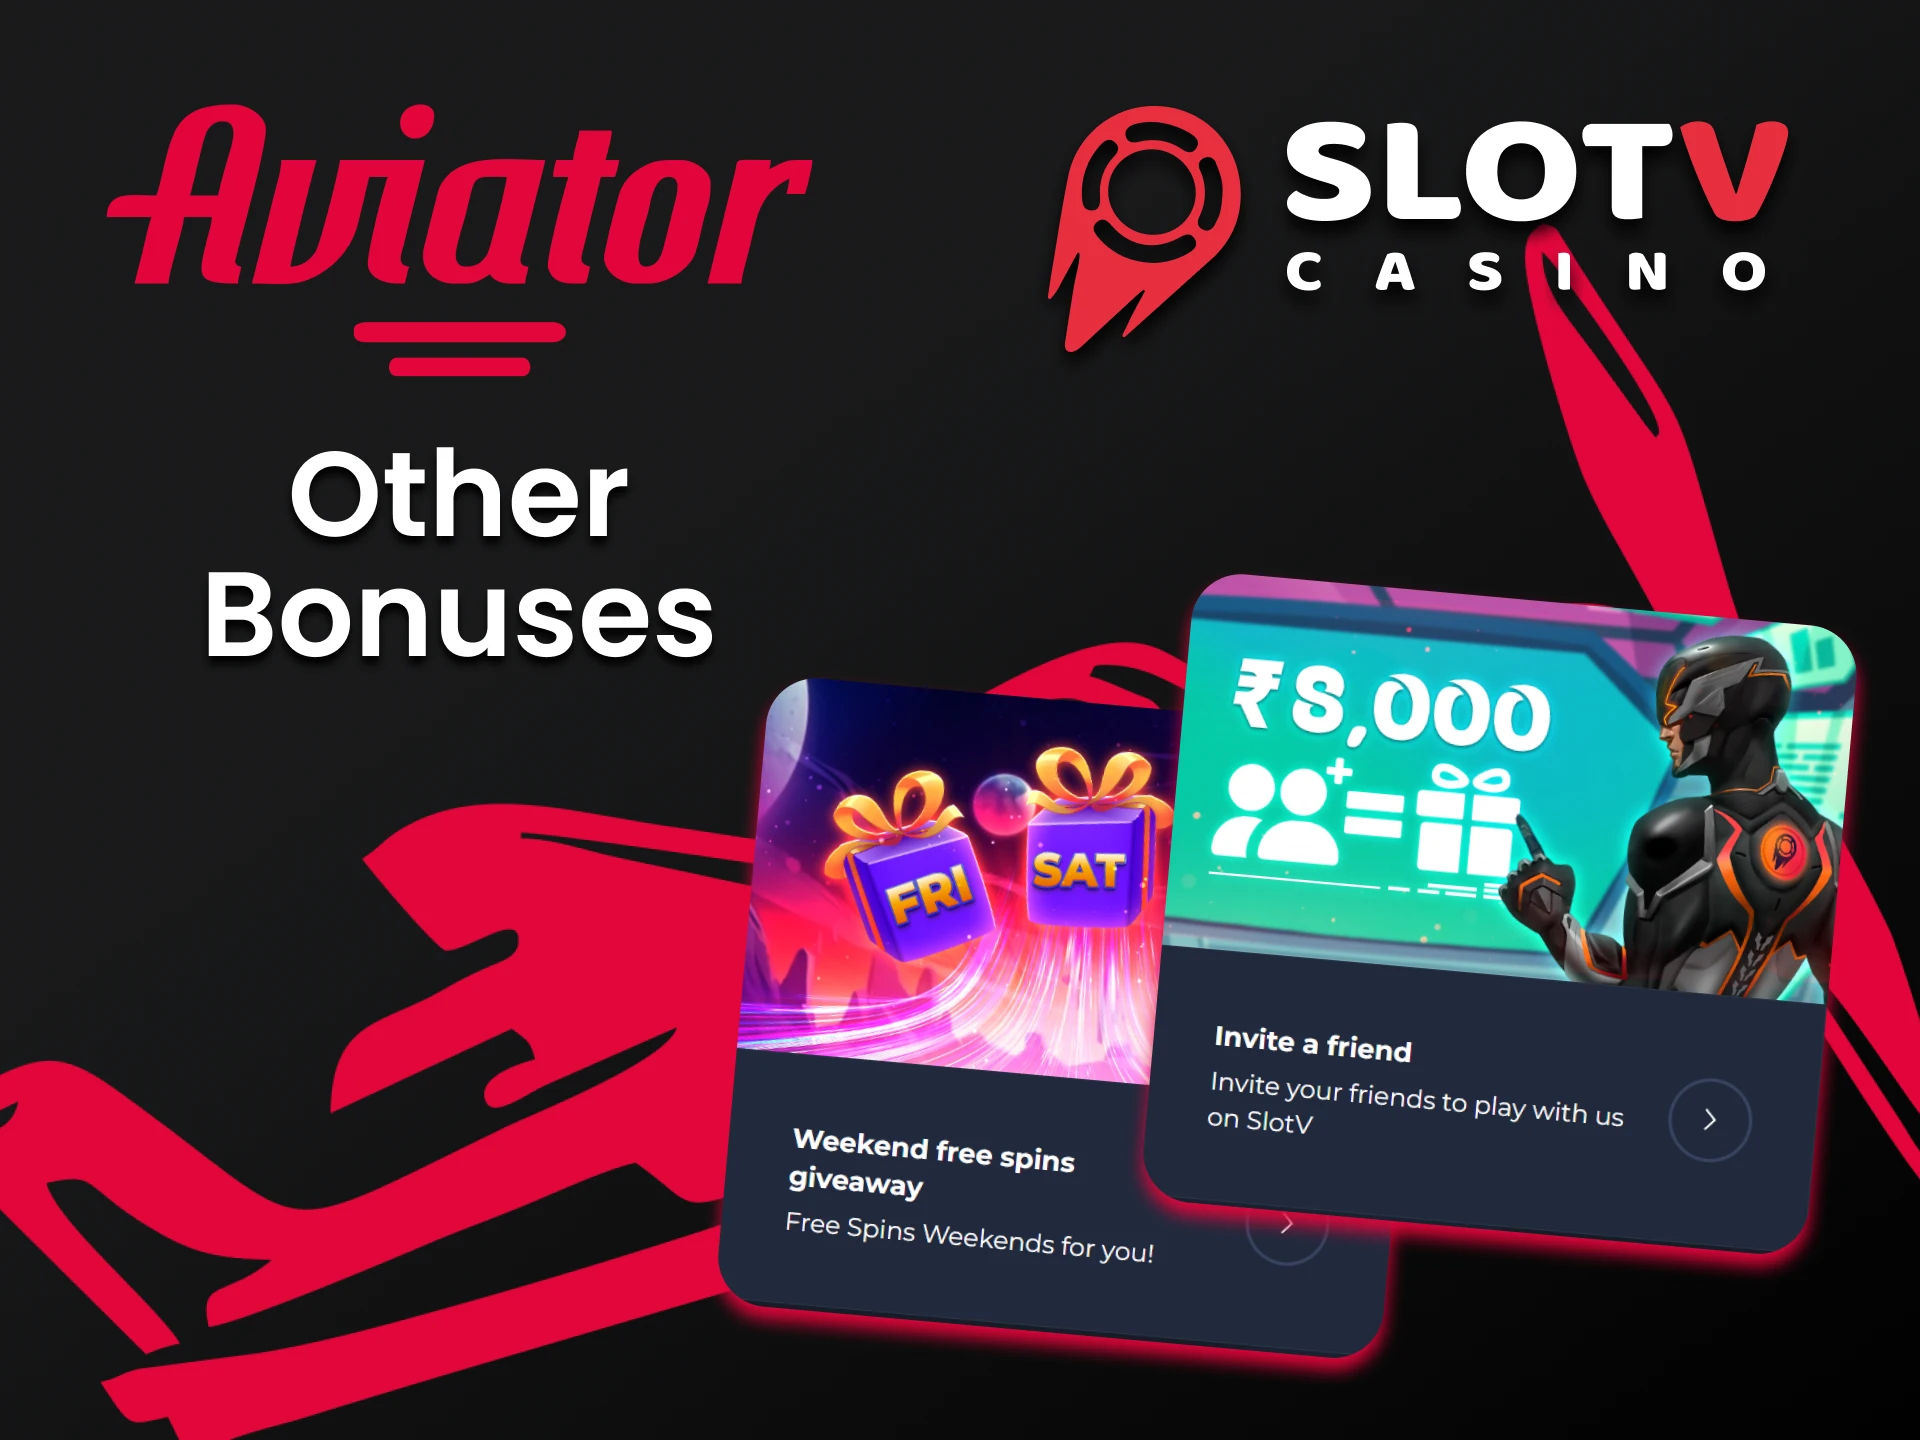 Find out about bonuses at SlotV for Aviator.